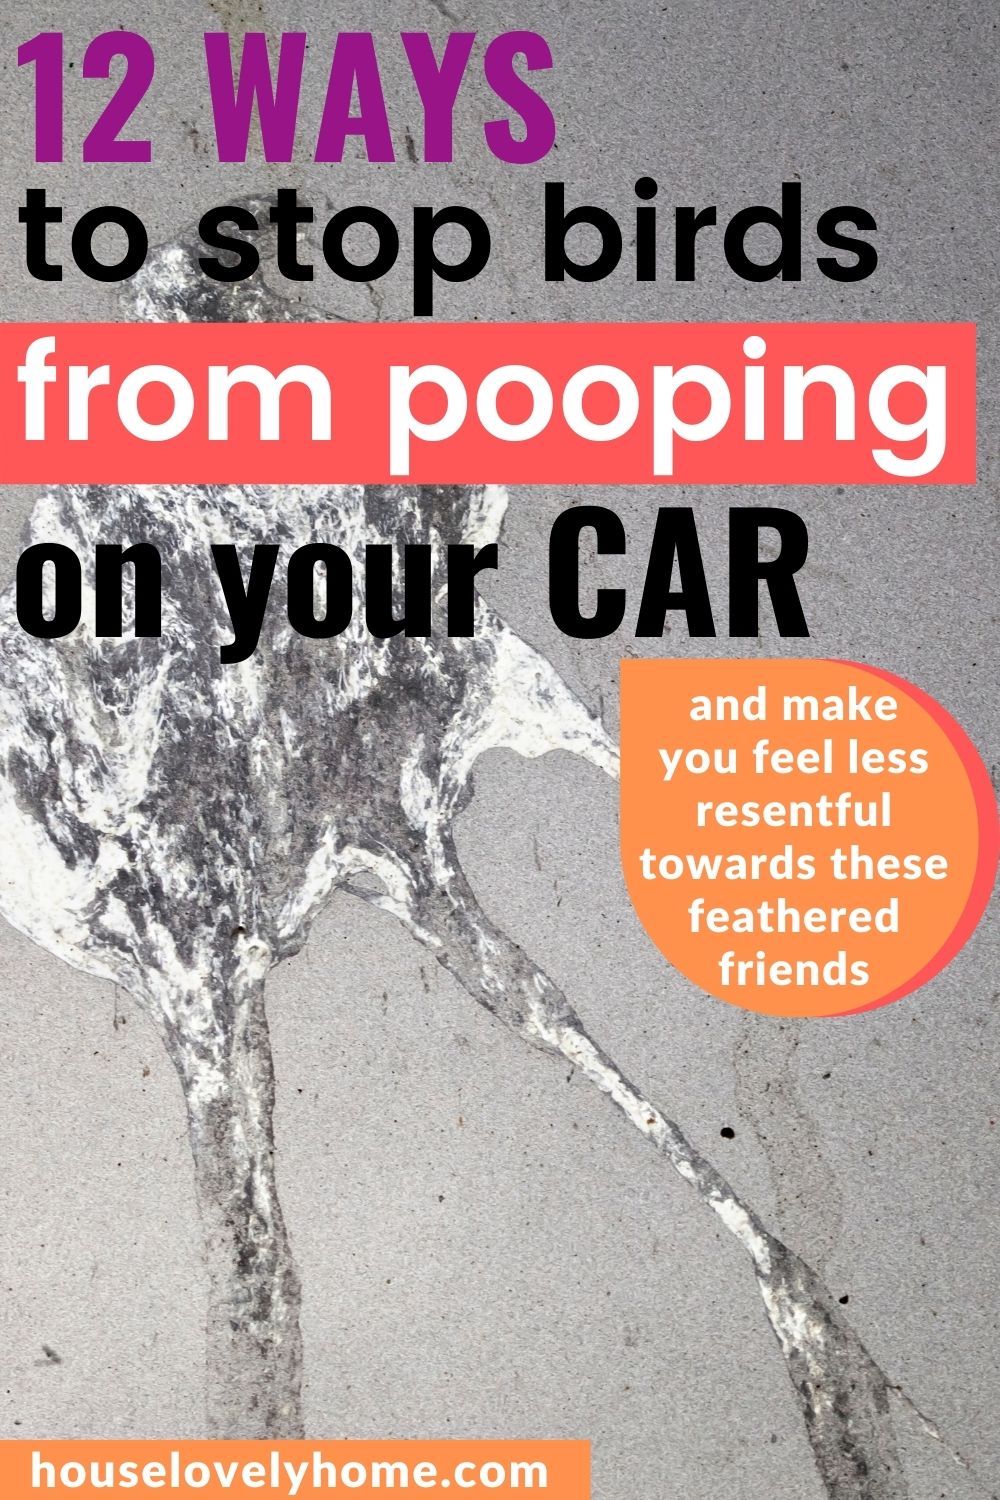 Photo showing a bird's poop on what looks like the car's windshield with text overlays that read 12 Ways to Stop Birds from Pooping On Your Car.